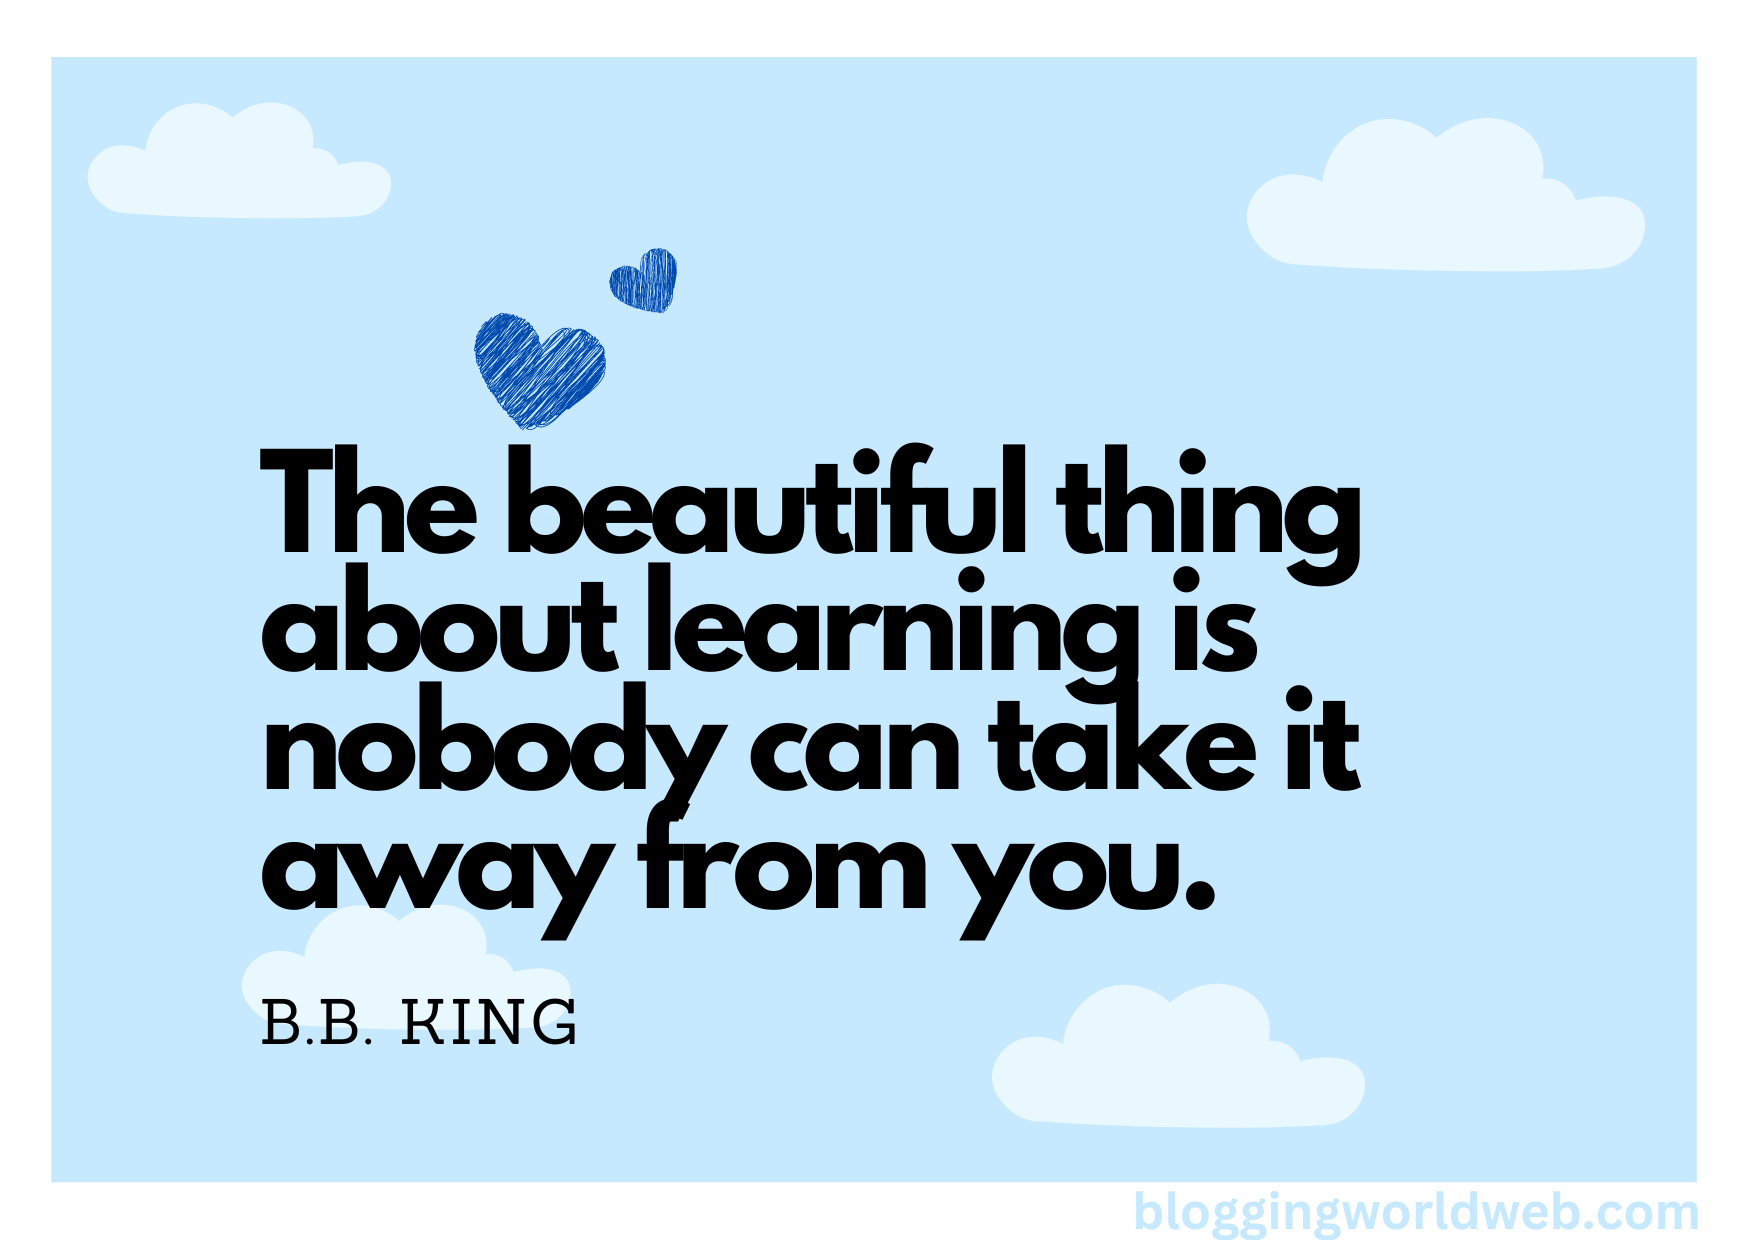 50 Most Inspiring Quotes About Learning to Inspire you in Life